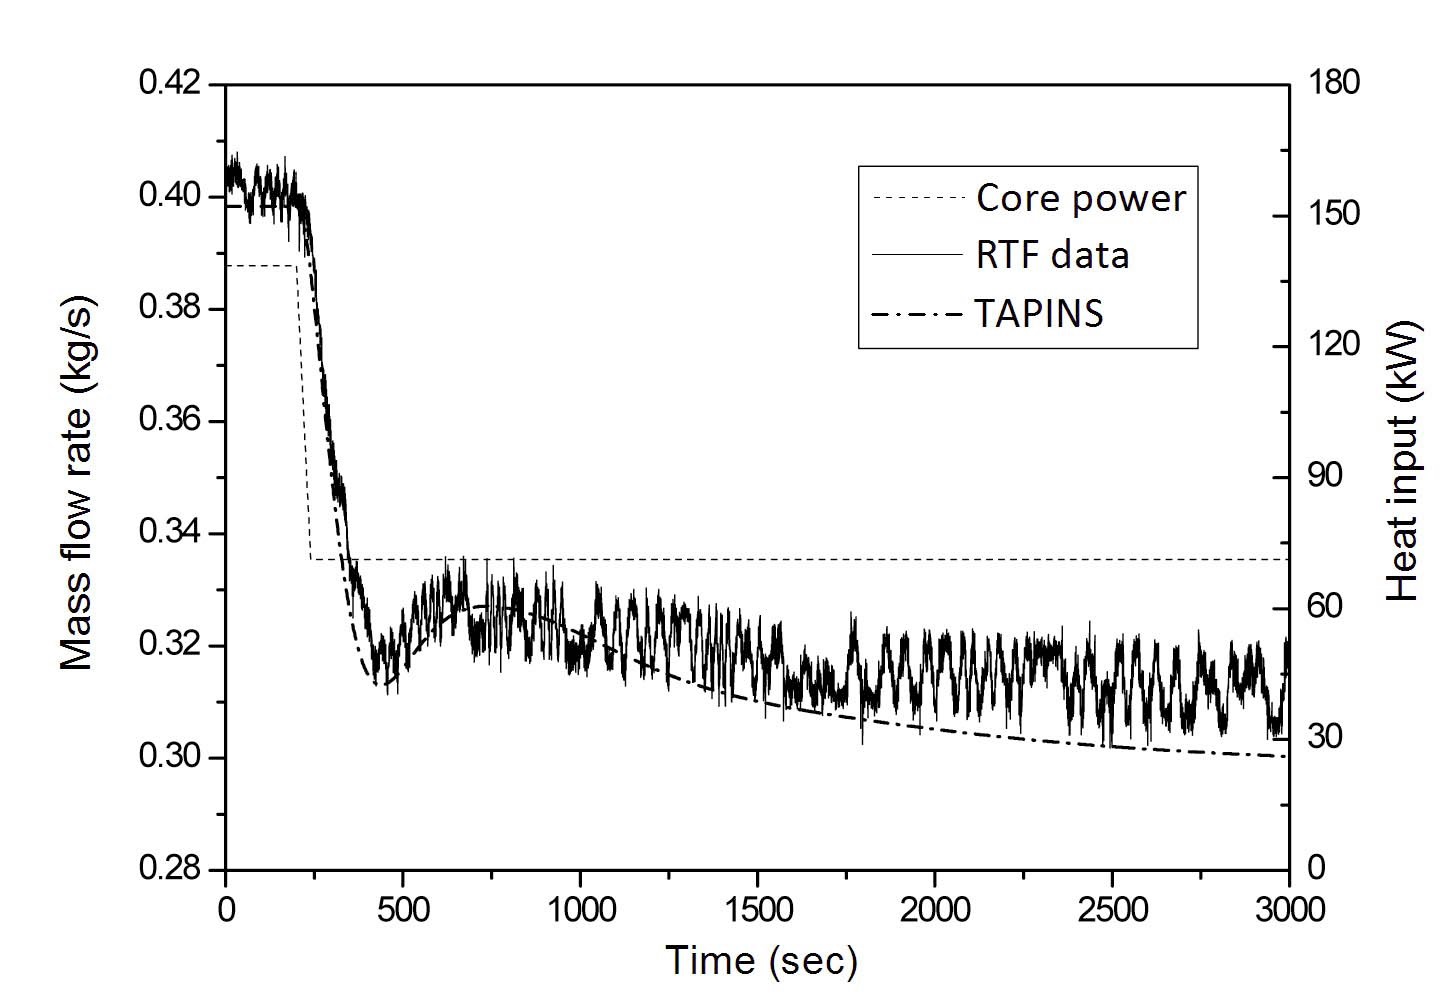 Coolant Flow Rate in Response to a Reduction in Core Power